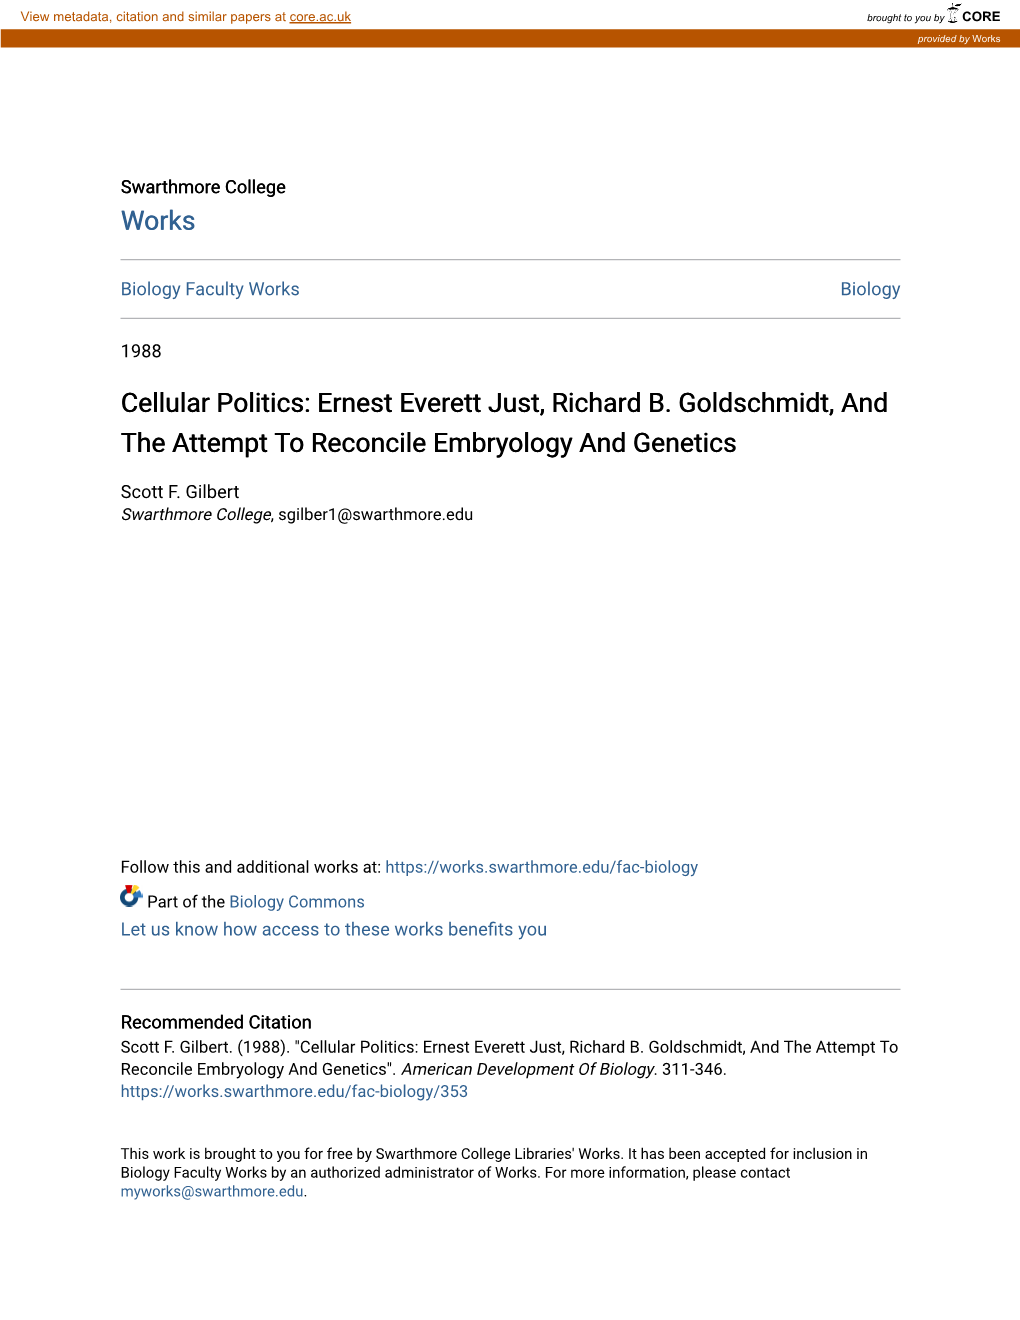 Cellular Politics: Ernest Everett Just, Richard B. Goldschmidt, and the Attempt to Reconcile Embryology and Genetics